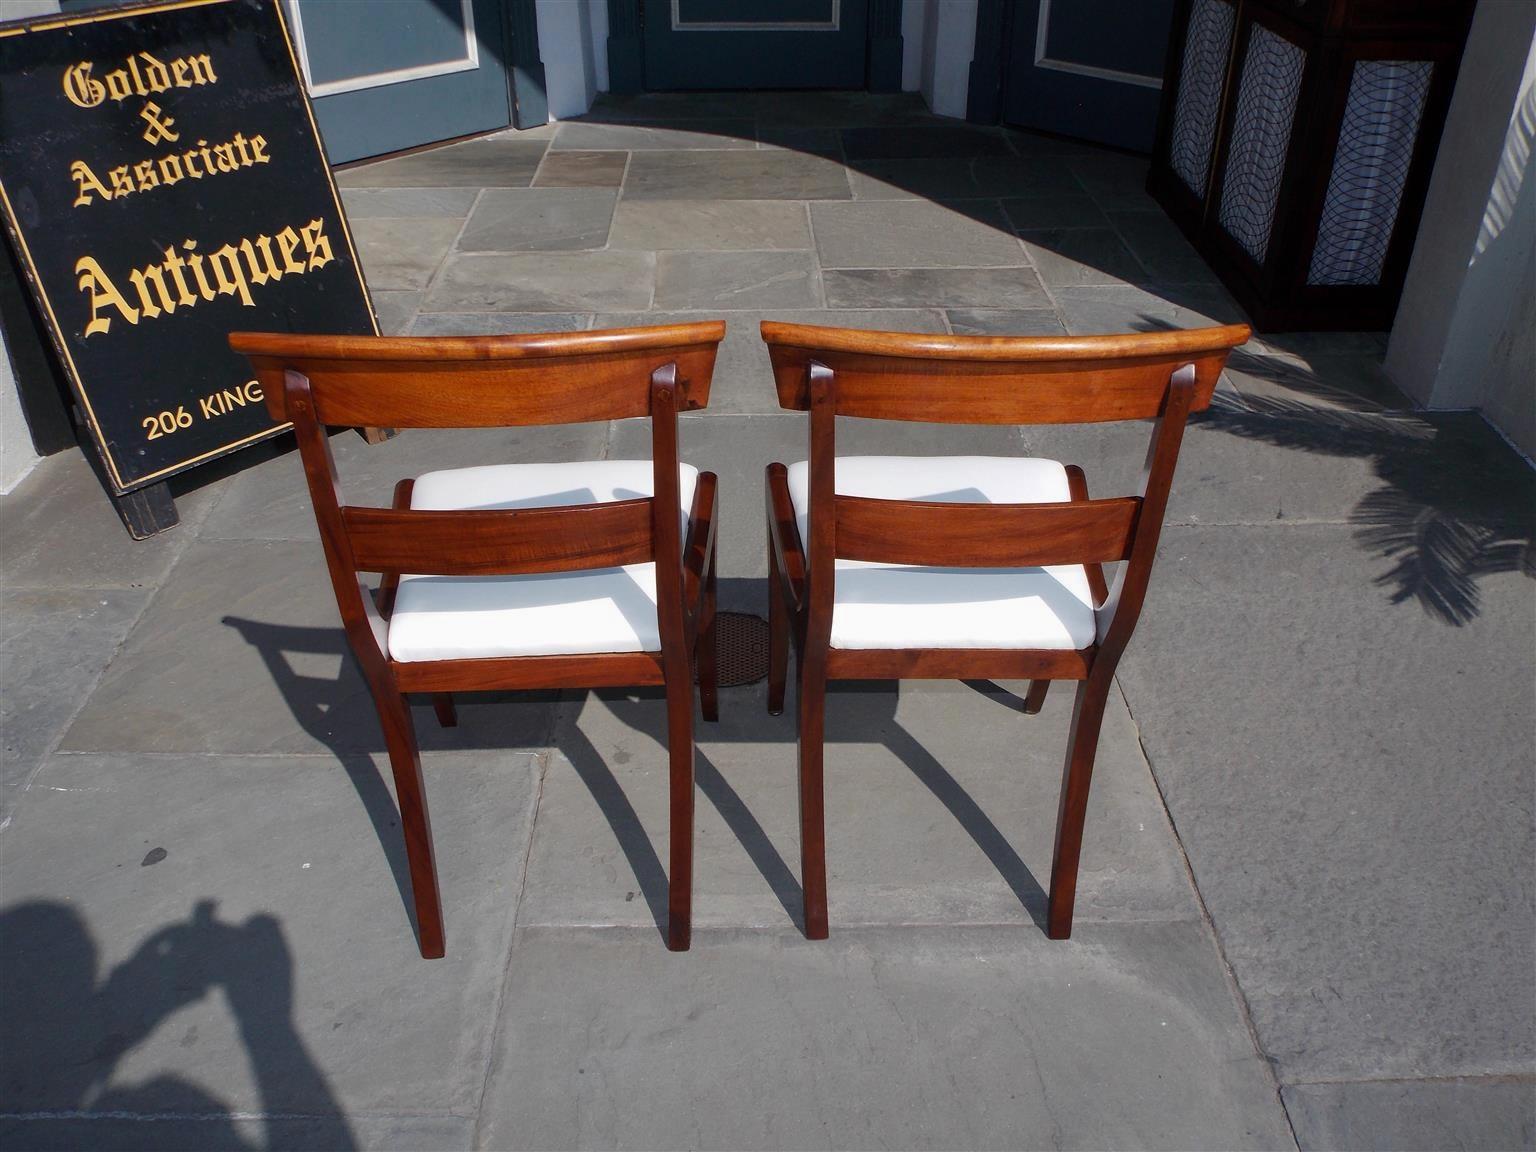 Muslin Pair of American Federal Mahogany Upholstered Side Chairs on Saber Legs, C. 1820